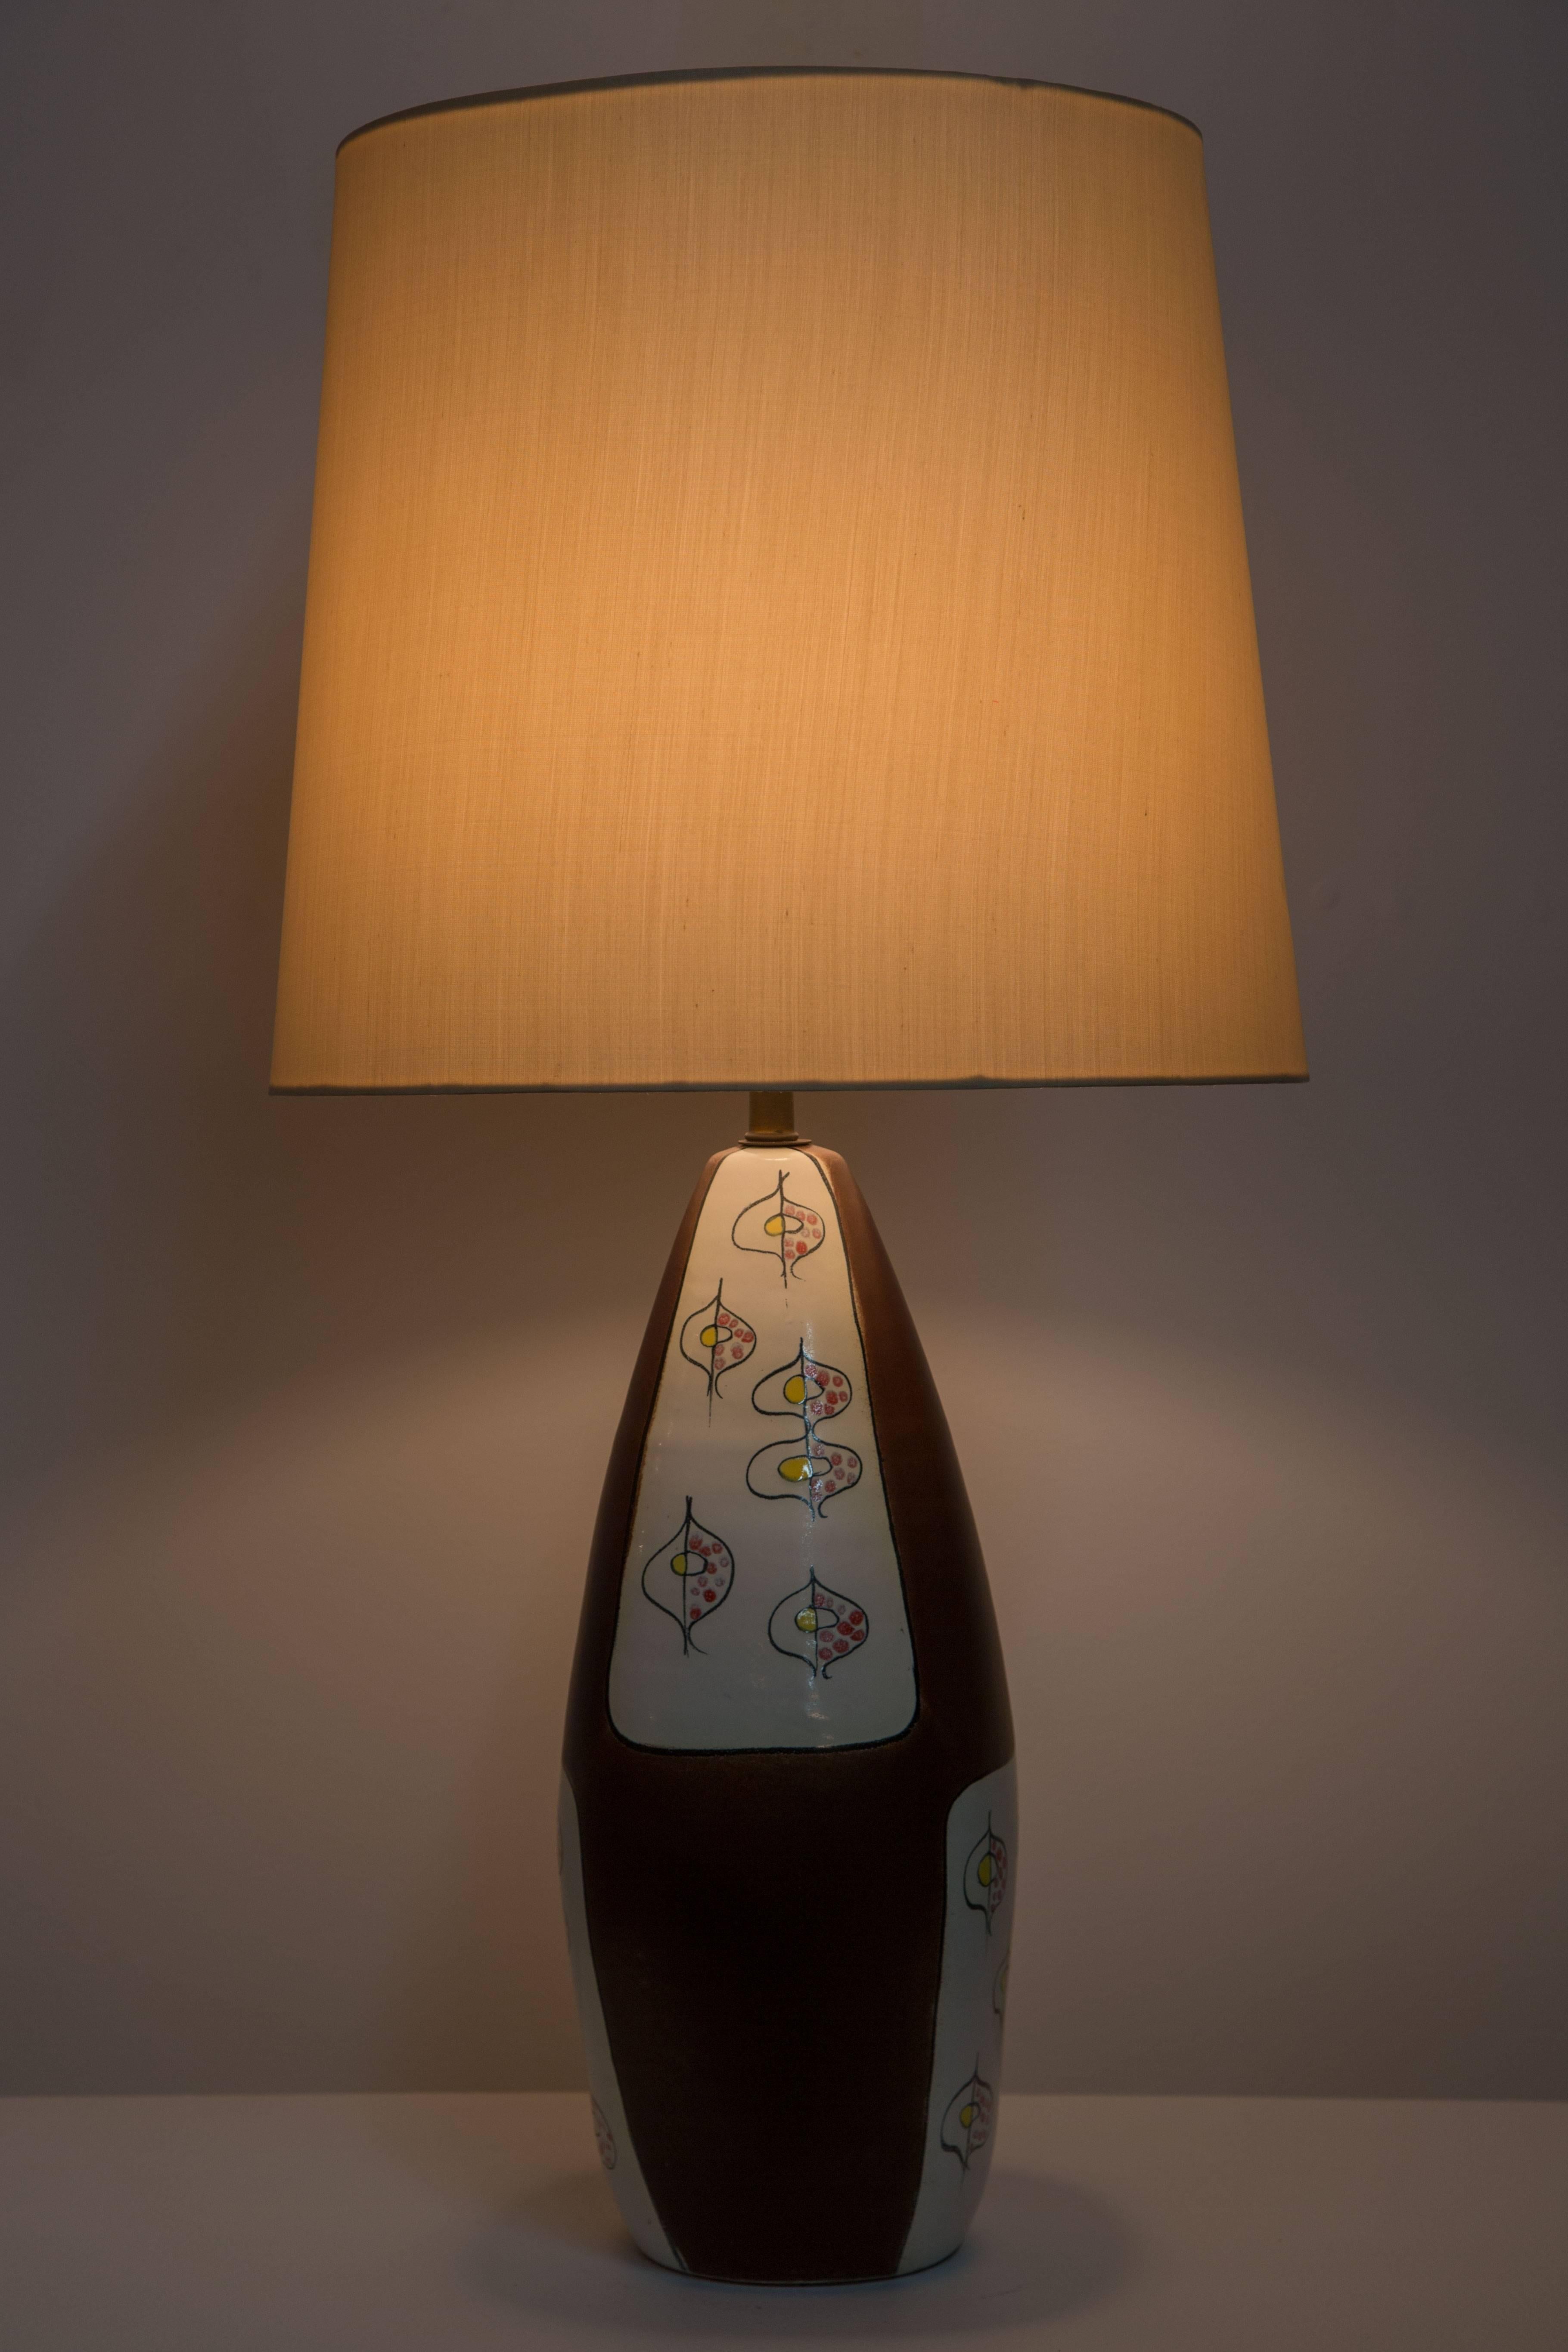 Bitossi Ceramiche studio hand-painted ceramic table lamp imported by Raymor.